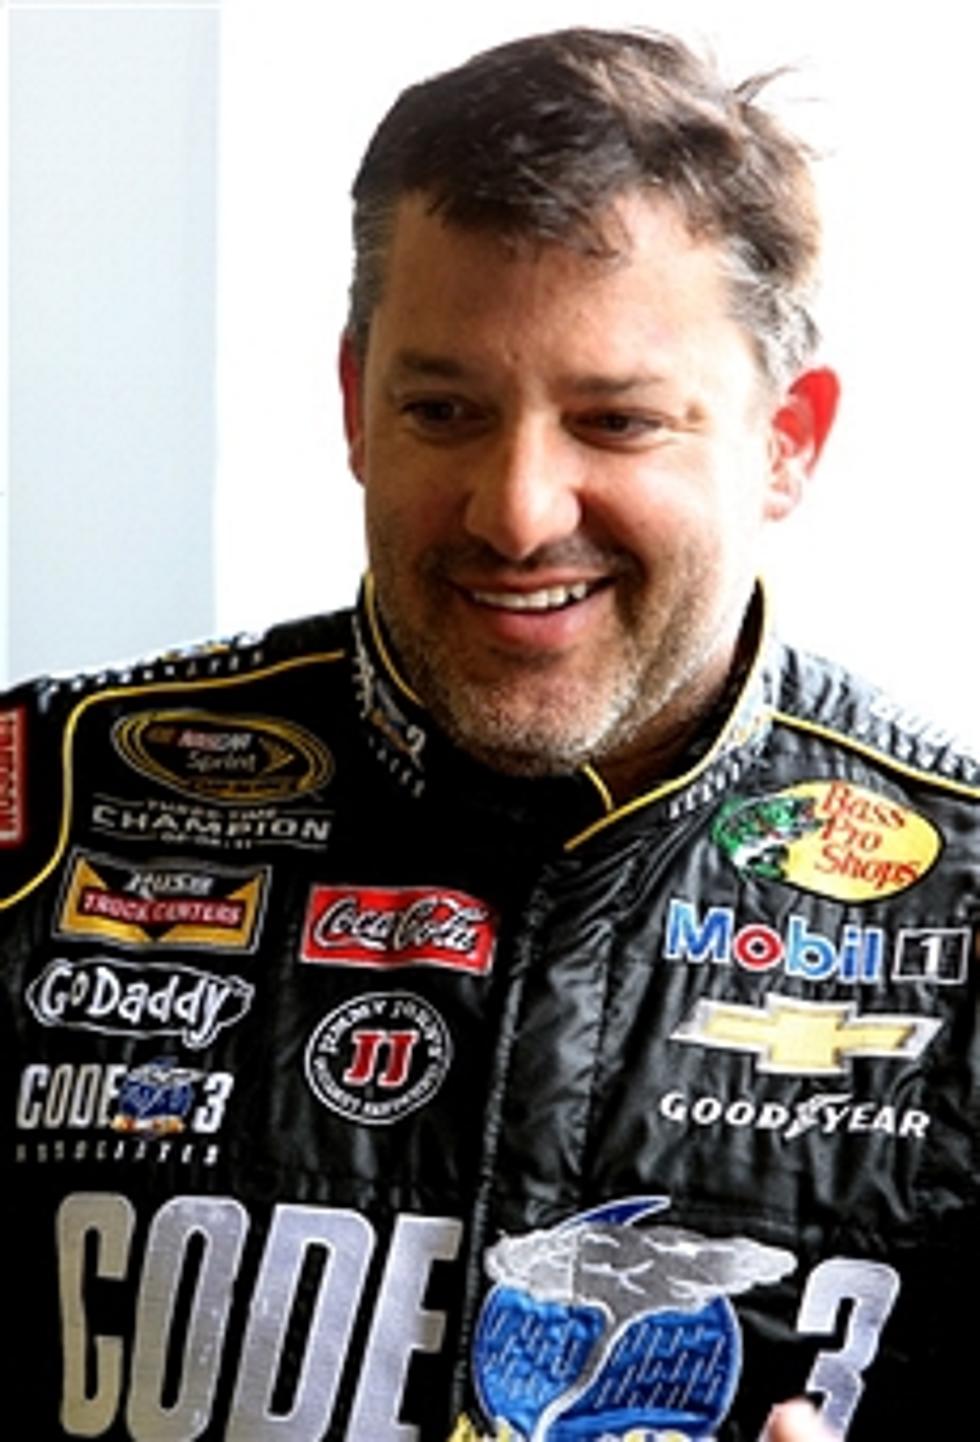 The Tony Stewart Racing Tragedy Never Should Have Happened